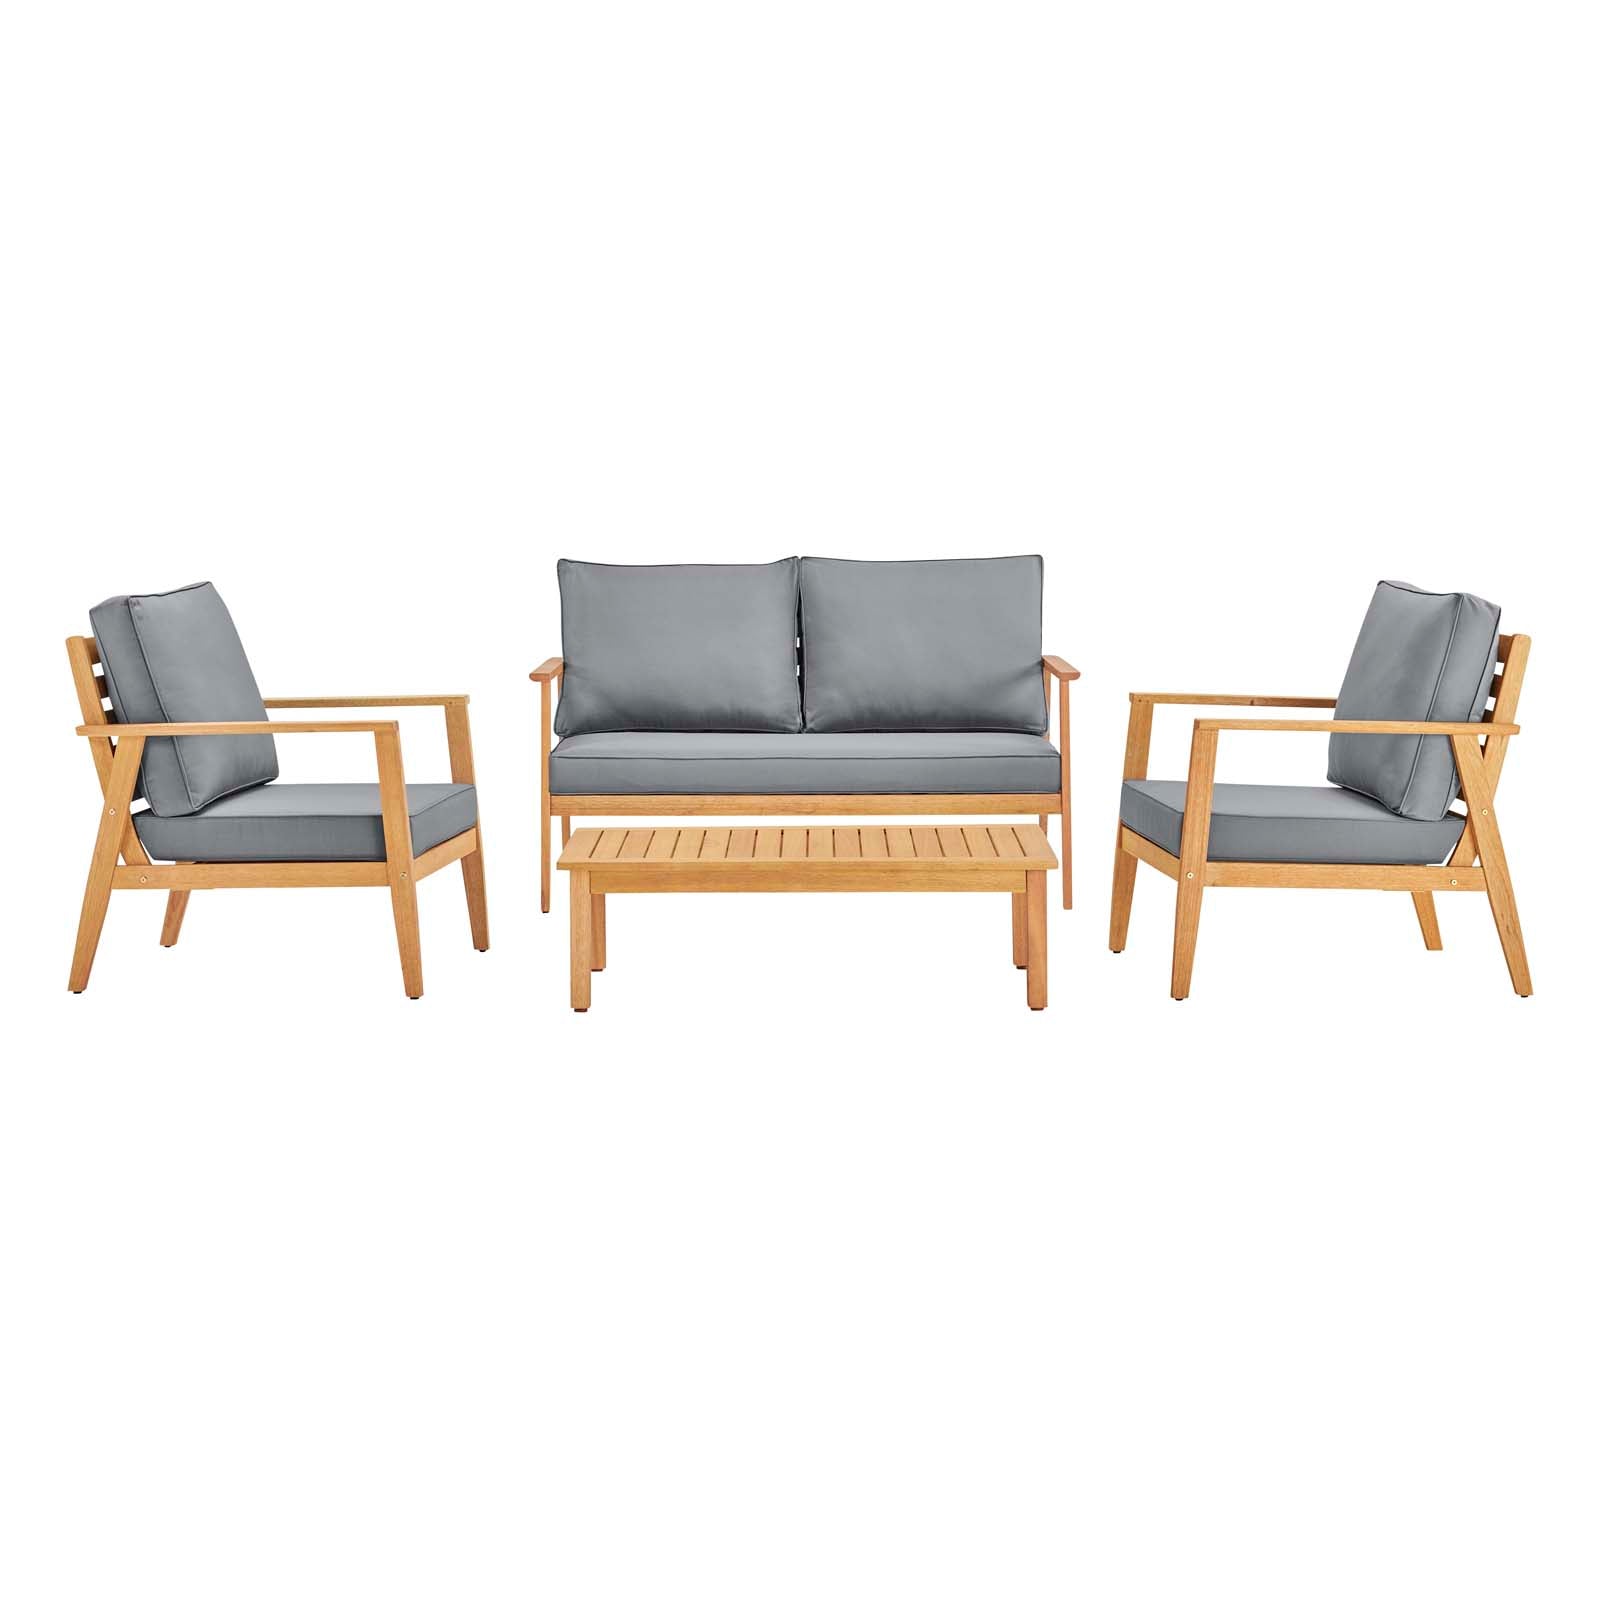 Syracuse Outdoor Patio Upholstered 4 Piece Furniture Set - East Shore Modern Home Furnishings